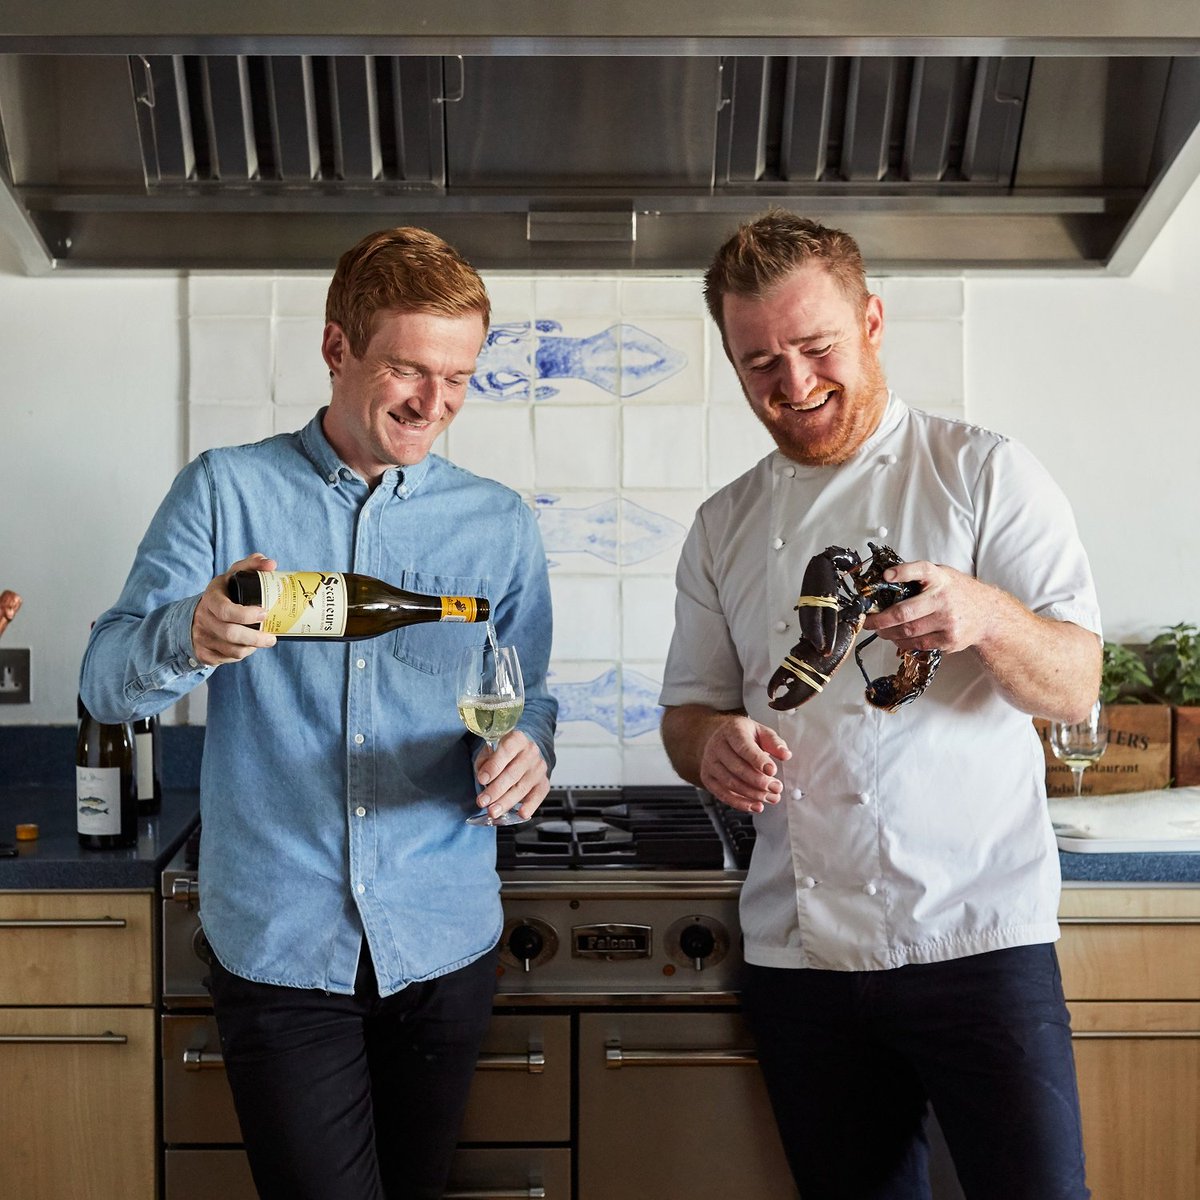 We're very excited to introduce a new series of wine dinners with @JackStein and @CharlieStein1 🍷 These evenings are your chance to hear stories and learn from Jack and Charlie whilst enjoying seriously good food and drink. Find out more and book here: bit.ly/3cA4qfU